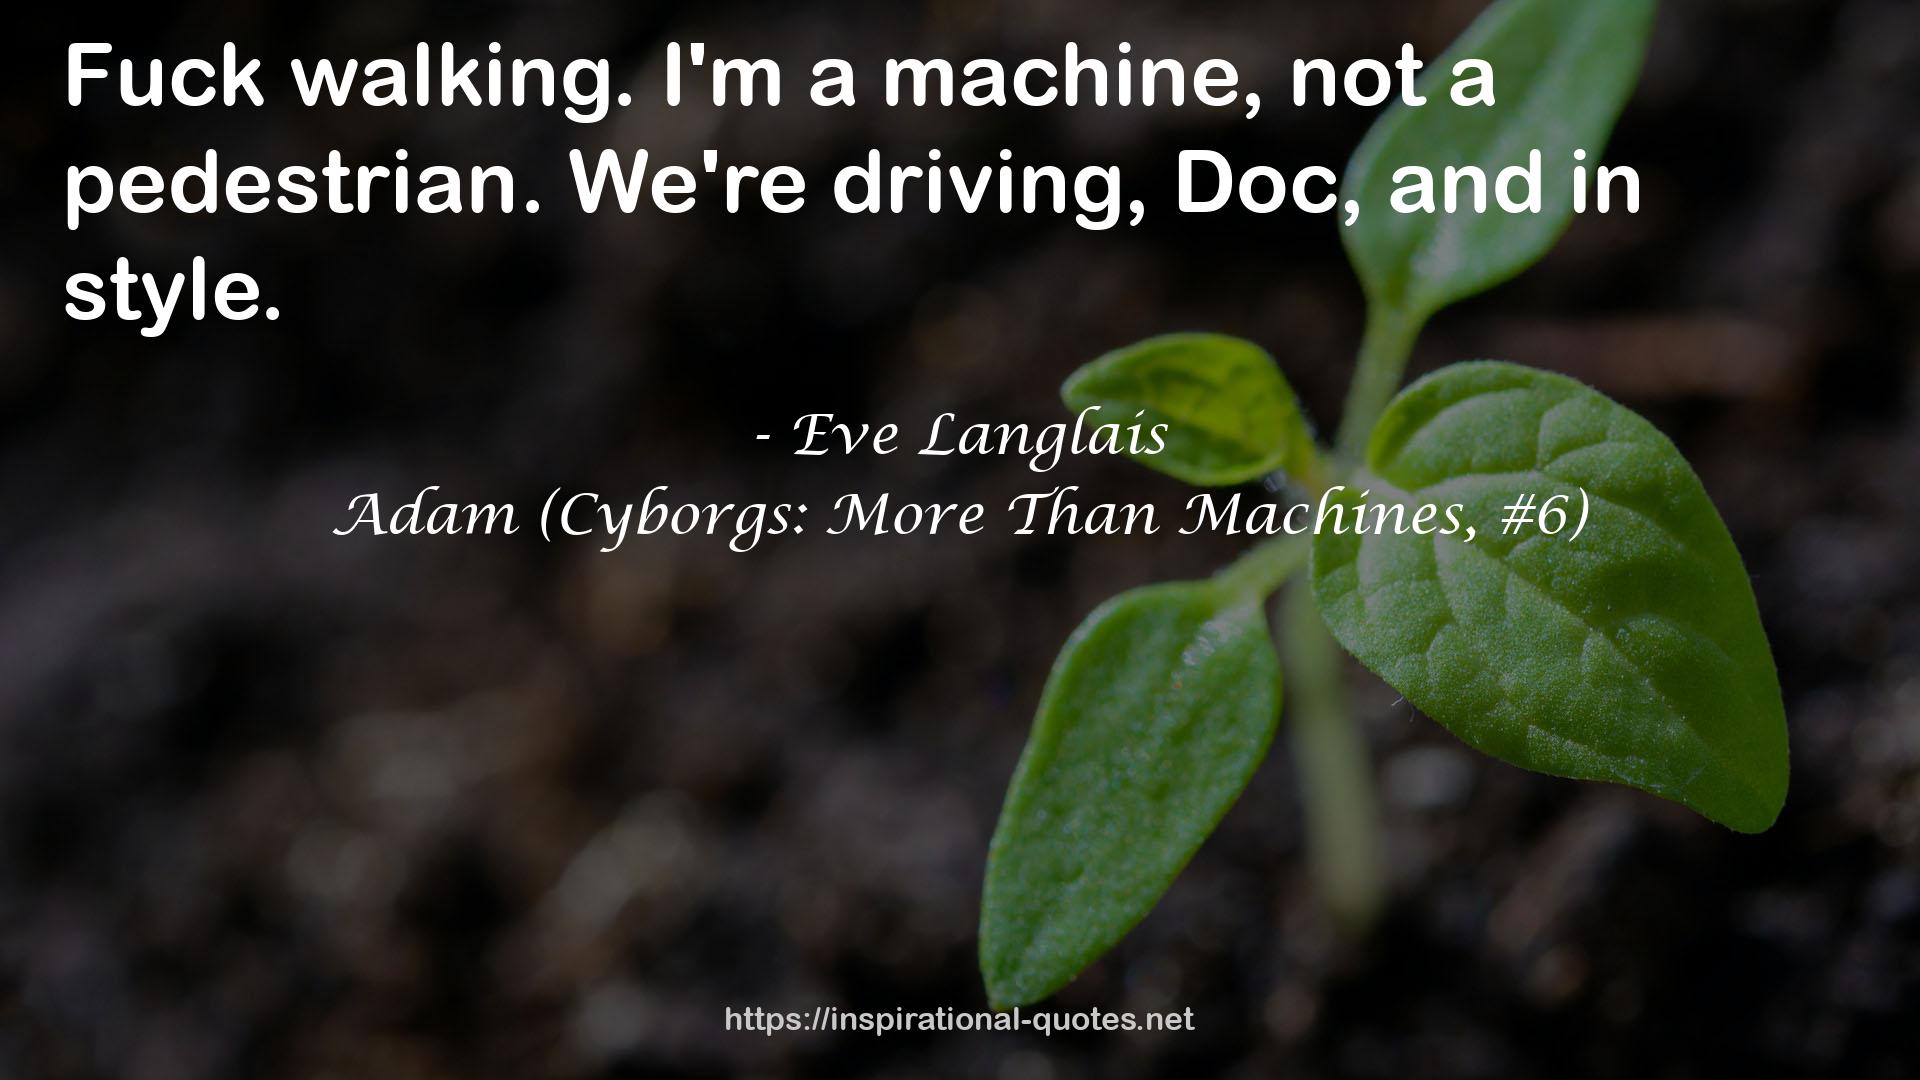 Adam (Cyborgs: More Than Machines, #6) QUOTES